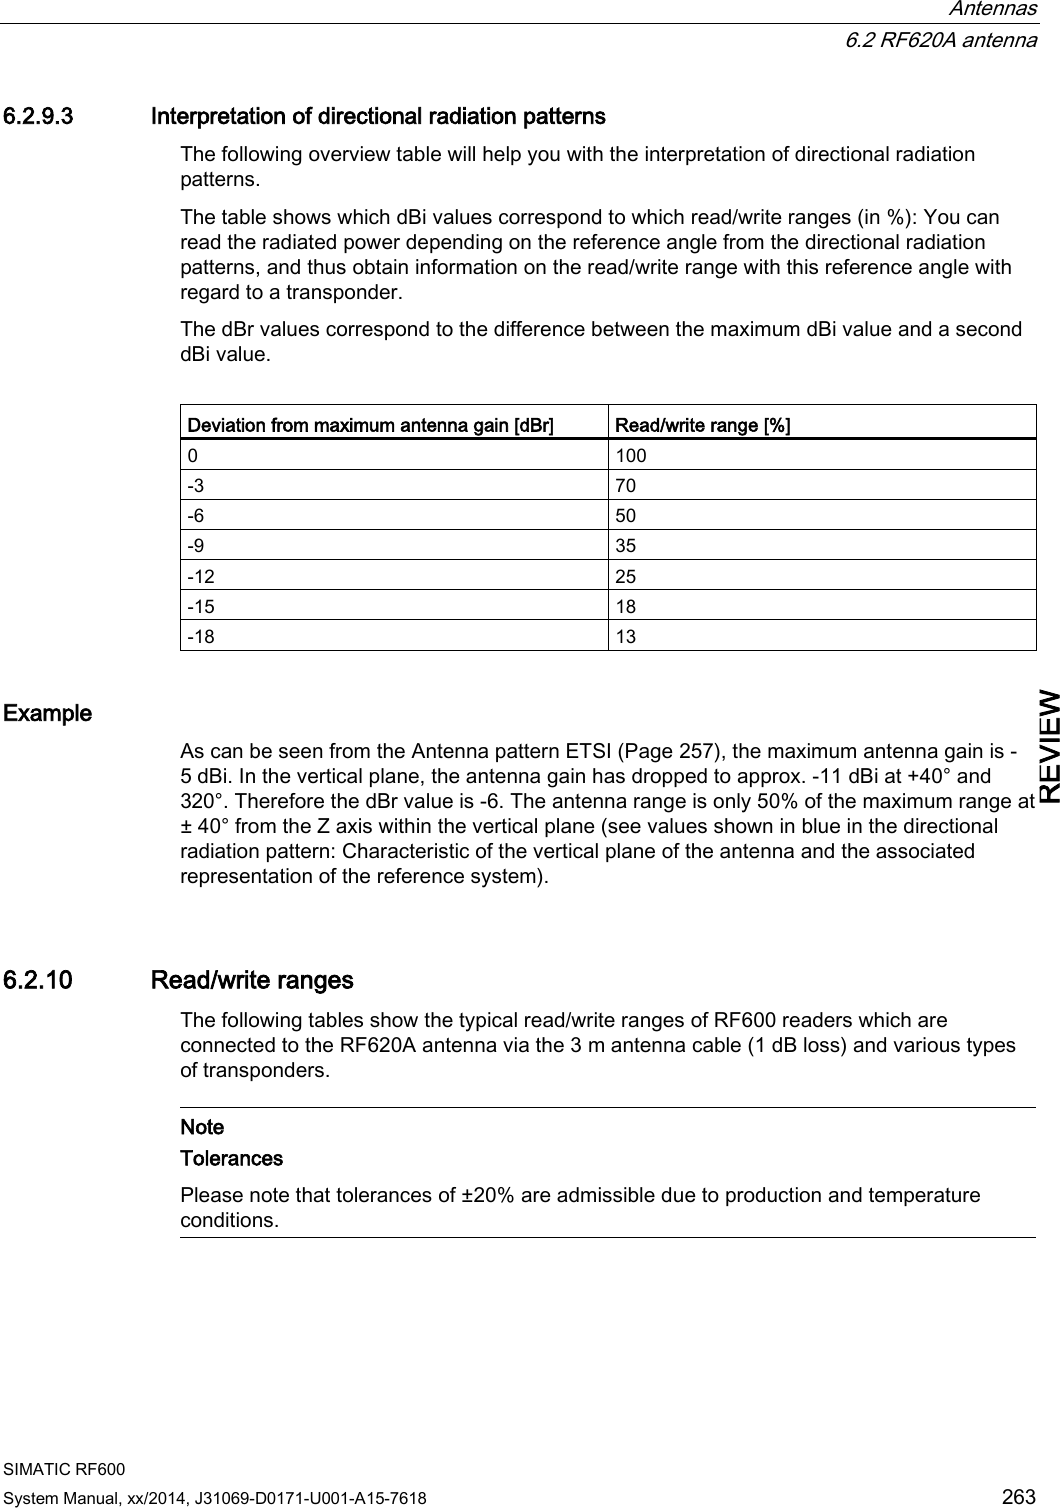  Antennas  6.2 RF620A antenna SIMATIC RF600 System Manual, xx/2014, J31069-D0171-U001-A15-7618 263 REVIEW 6.2.9.3 Interpretation of directional radiation patterns The following overview table will help you with the interpretation of directional radiation patterns.  The table shows which dBi values correspond to which read/write ranges (in %): You can read the radiated power depending on the reference angle from the directional radiation patterns, and thus obtain information on the read/write range with this reference angle with regard to a transponder. The dBr values correspond to the difference between the maximum dBi value and a second dBi value.  Deviation from maximum antenna gain [dBr] Read/write range [%] 0 100 -3 70 -6 50 -9 35 -12 25 -15 18 -18 13 Example As can be seen from the Antenna pattern ETSI (Page 257), the maximum antenna gain is -5 dBi. In the vertical plane, the antenna gain has dropped to approx. -11 dBi at +40° and 320°. Therefore the dBr value is -6. The antenna range is only 50% of the maximum range at ± 40° from the Z axis within the vertical plane (see values shown in blue in the directional radiation pattern: Characteristic of the vertical plane of the antenna and the associated representation of the reference system). 6.2.10 Read/write ranges The following tables show the typical read/write ranges of RF600 readers which are connected to the RF620A antenna via the 3 m antenna cable (1 dB loss) and various types of transponders.    Note Tolerances Please note that tolerances of ±20% are admissible due to production and temperature conditions.  